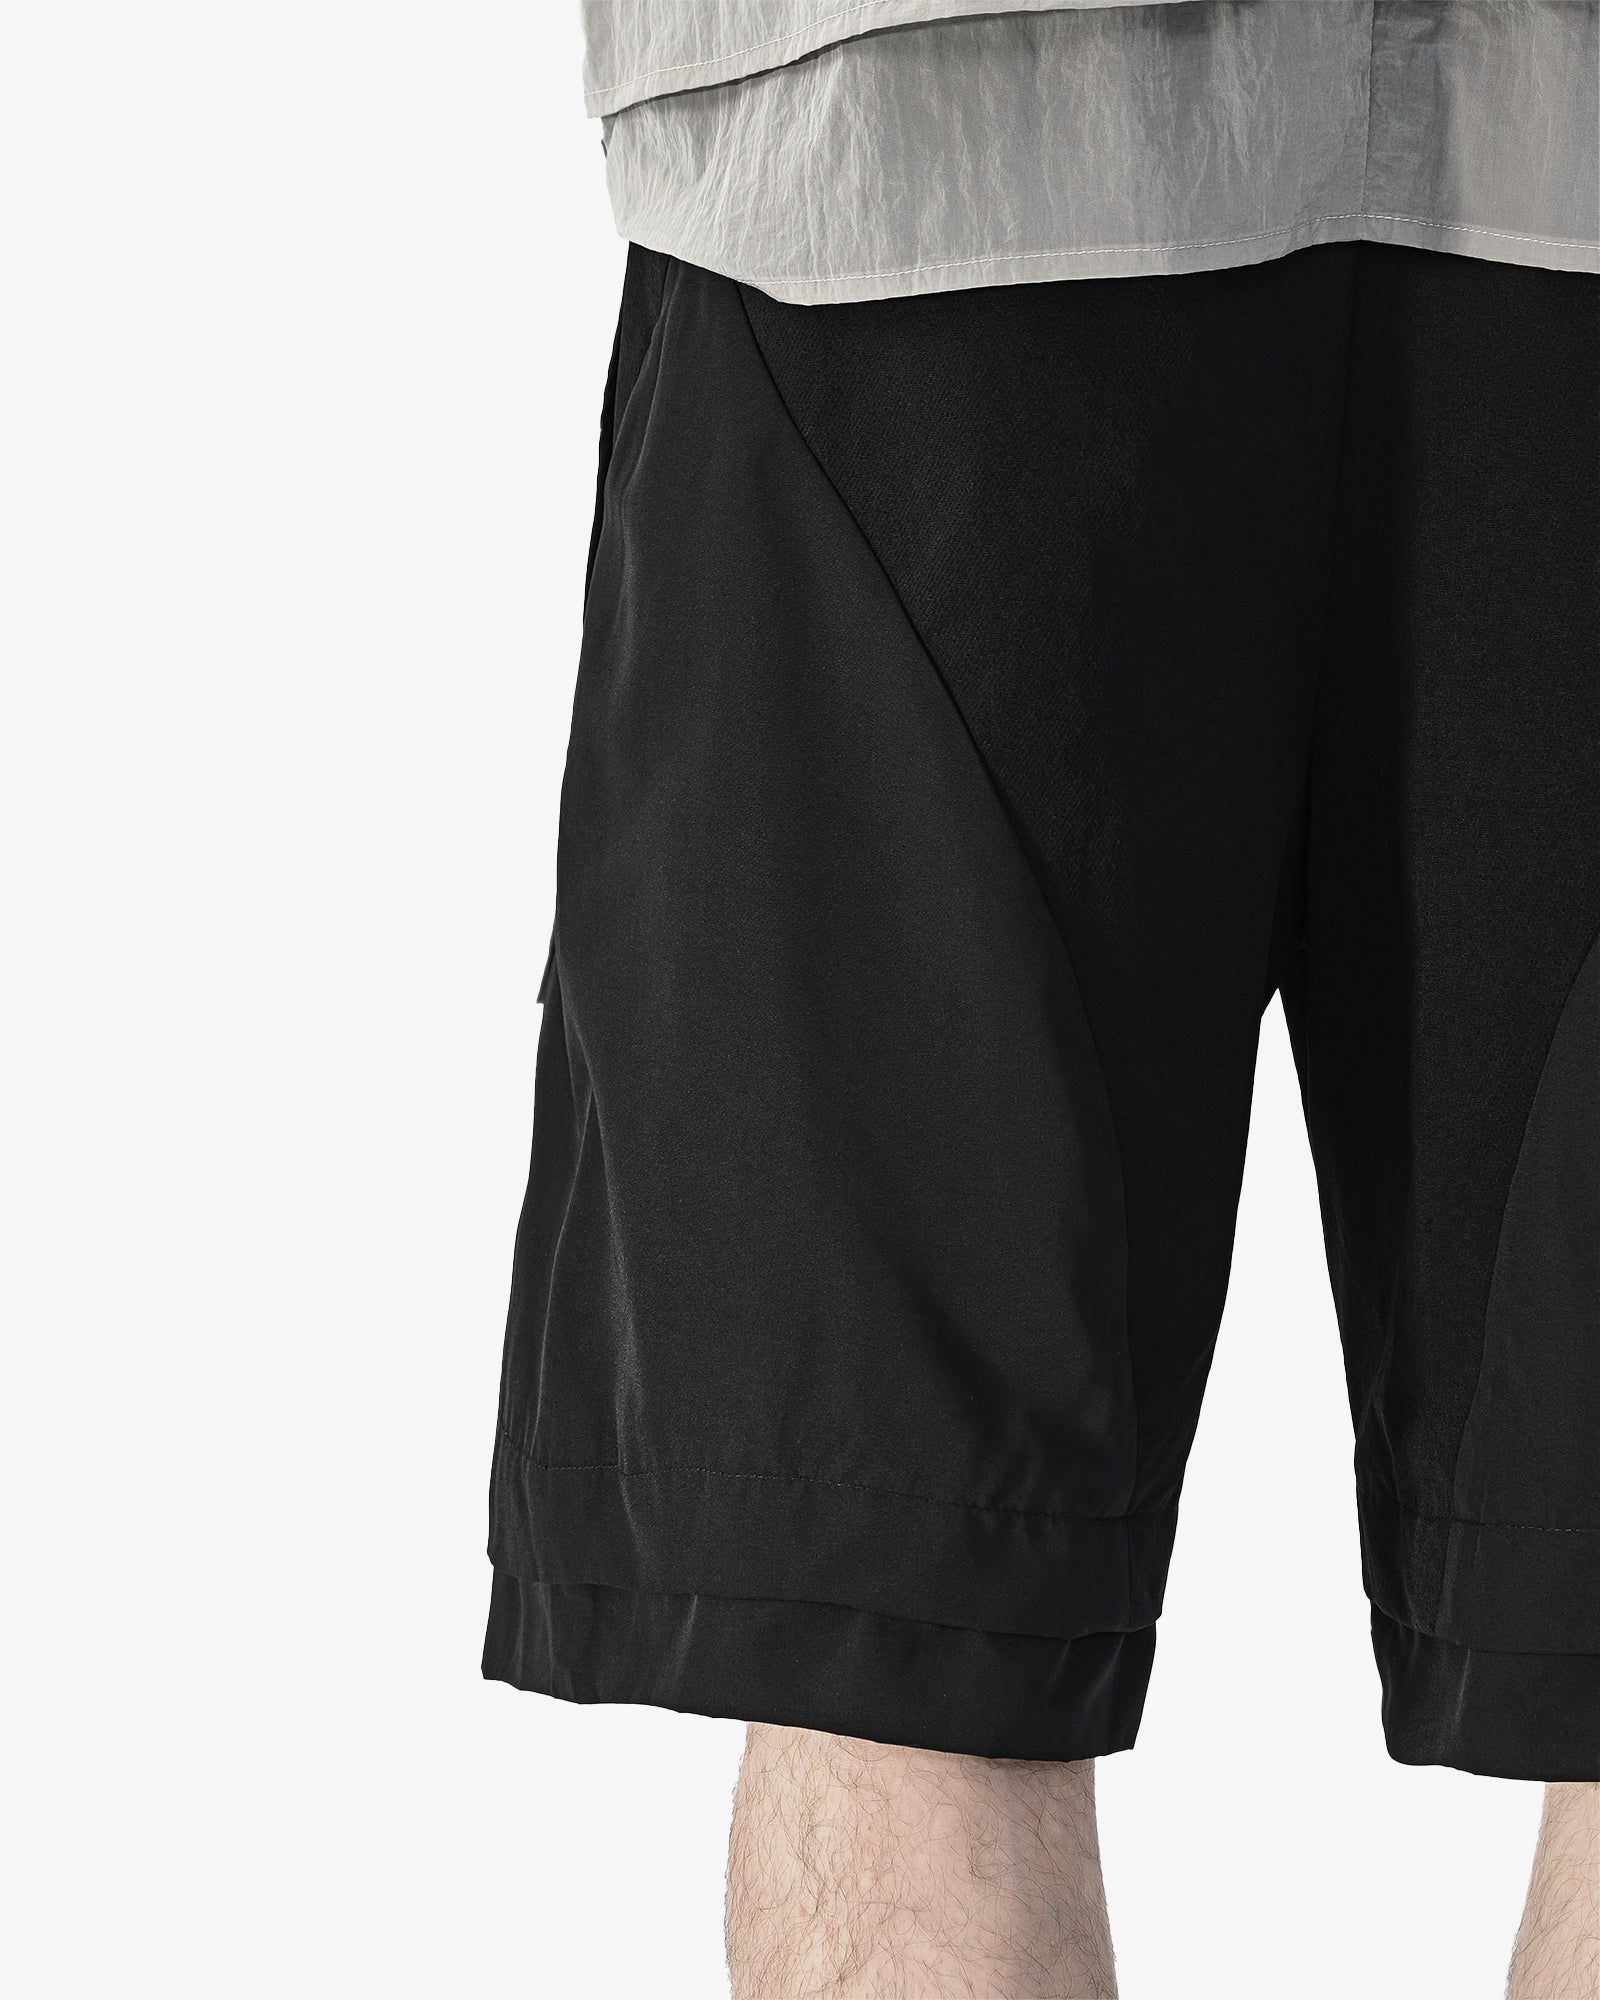 Water Repellent Oversized Tech Shorts